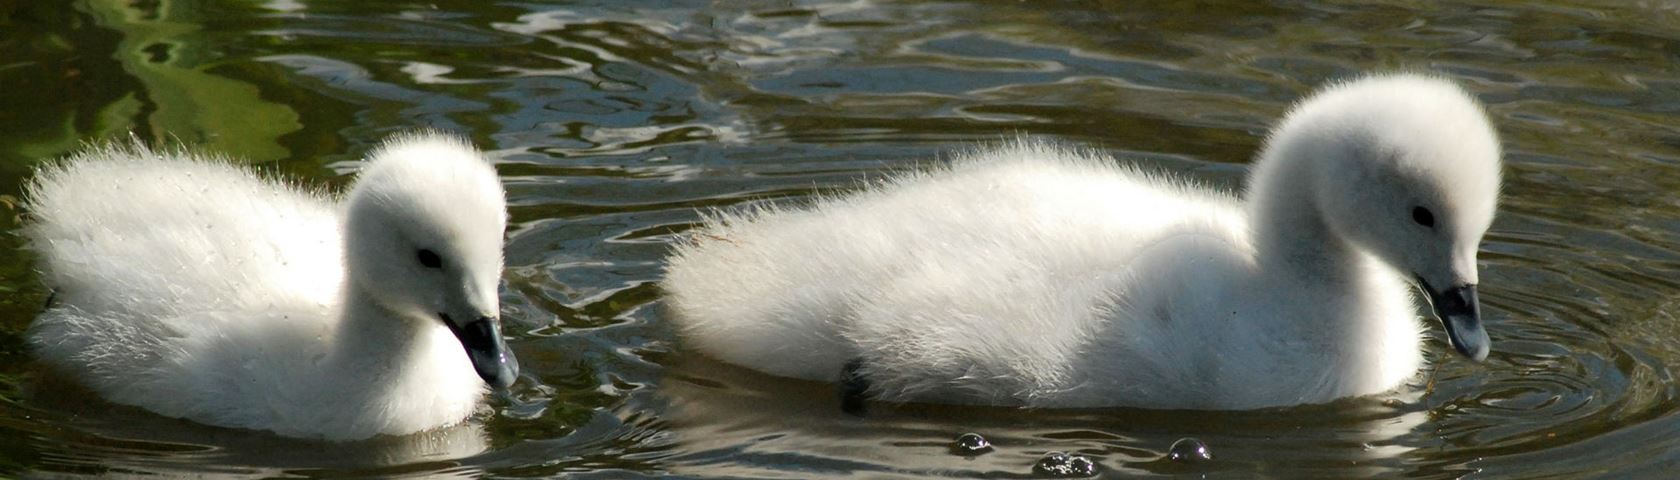 Baby Cygnets Out for a Swim